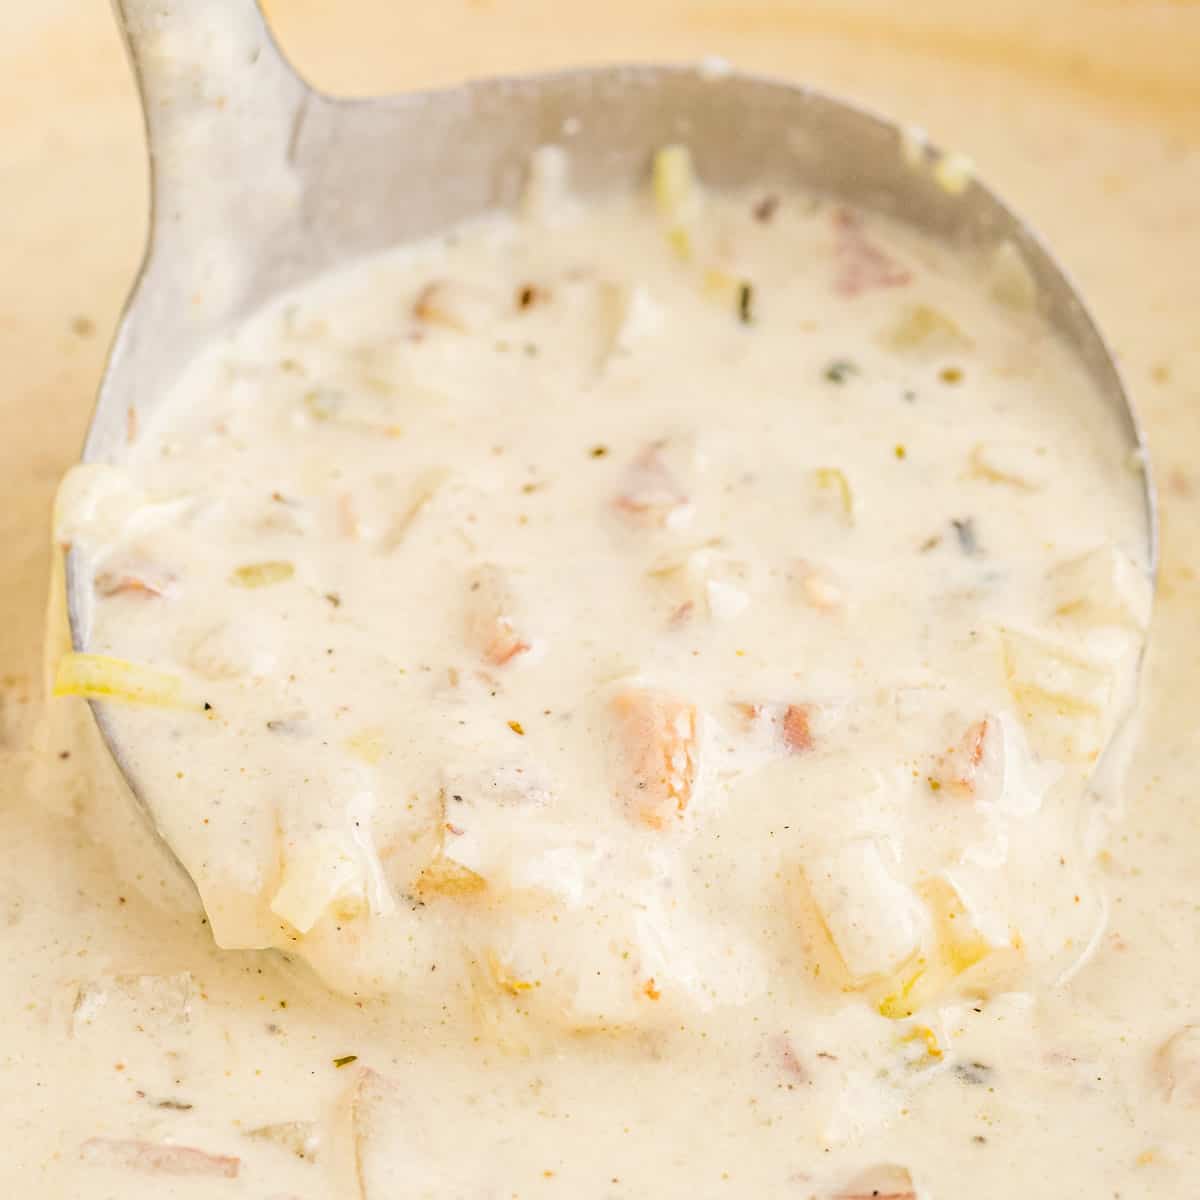 https://www.thechunkychef.com/wp-content/uploads/2023/01/Creamy-New-England-Style-Clam-Chowder-recipe-card.jpg